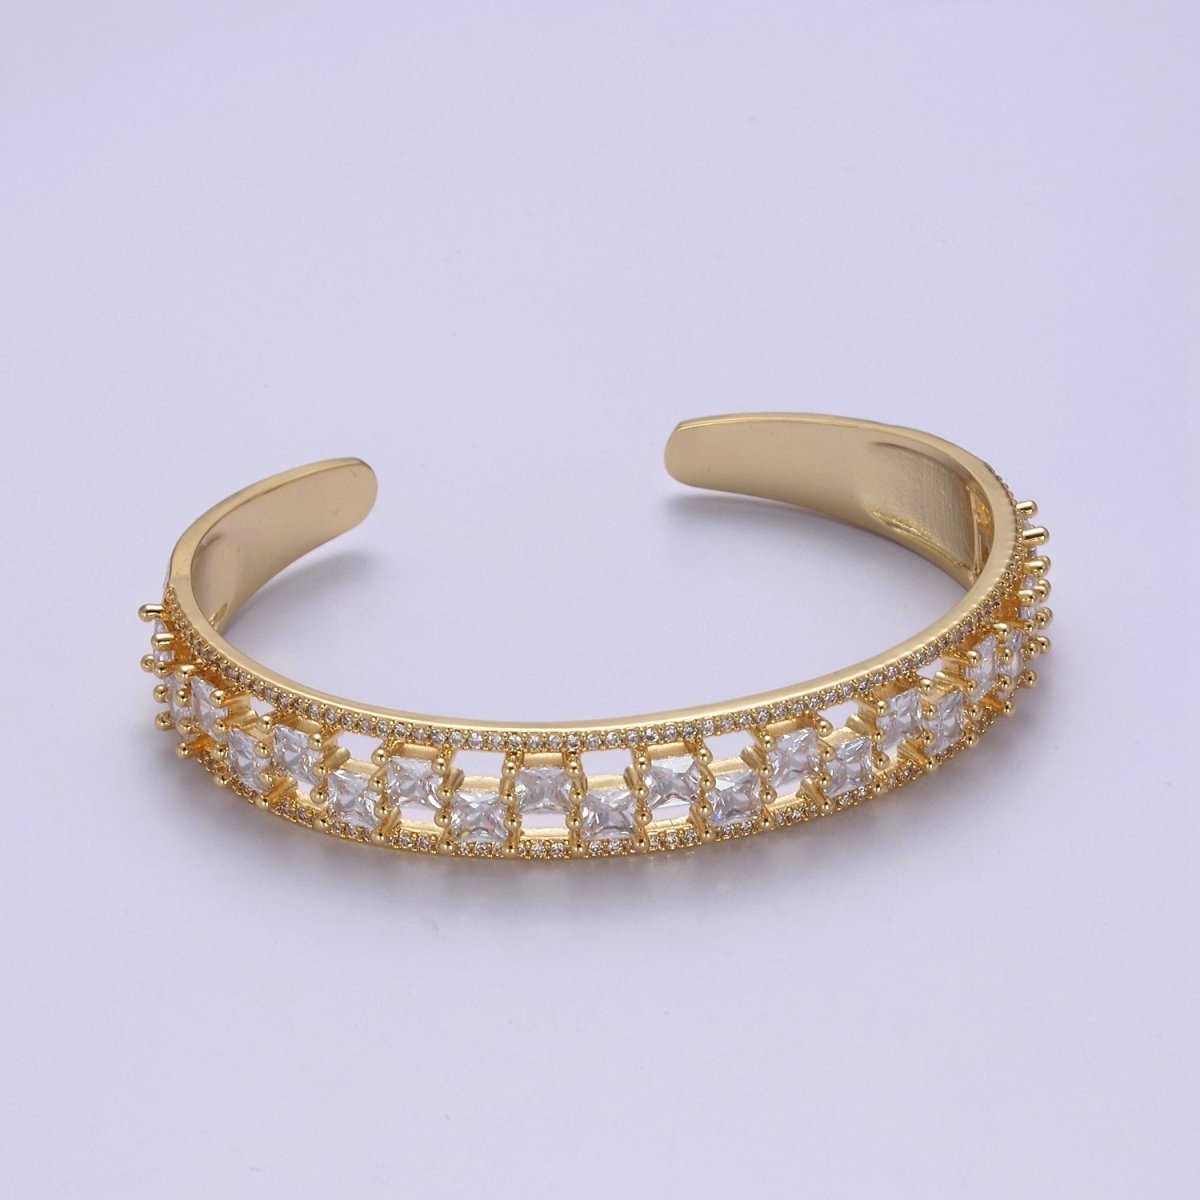 Gold CZ Diamond bangles studded with Clear White, Fuchsia Blue, Green stones | New fashion designer bangles | CZ Diamond bangles Bracelet | WA-780 to WA-783 Clearance Pricing - DLUXCA